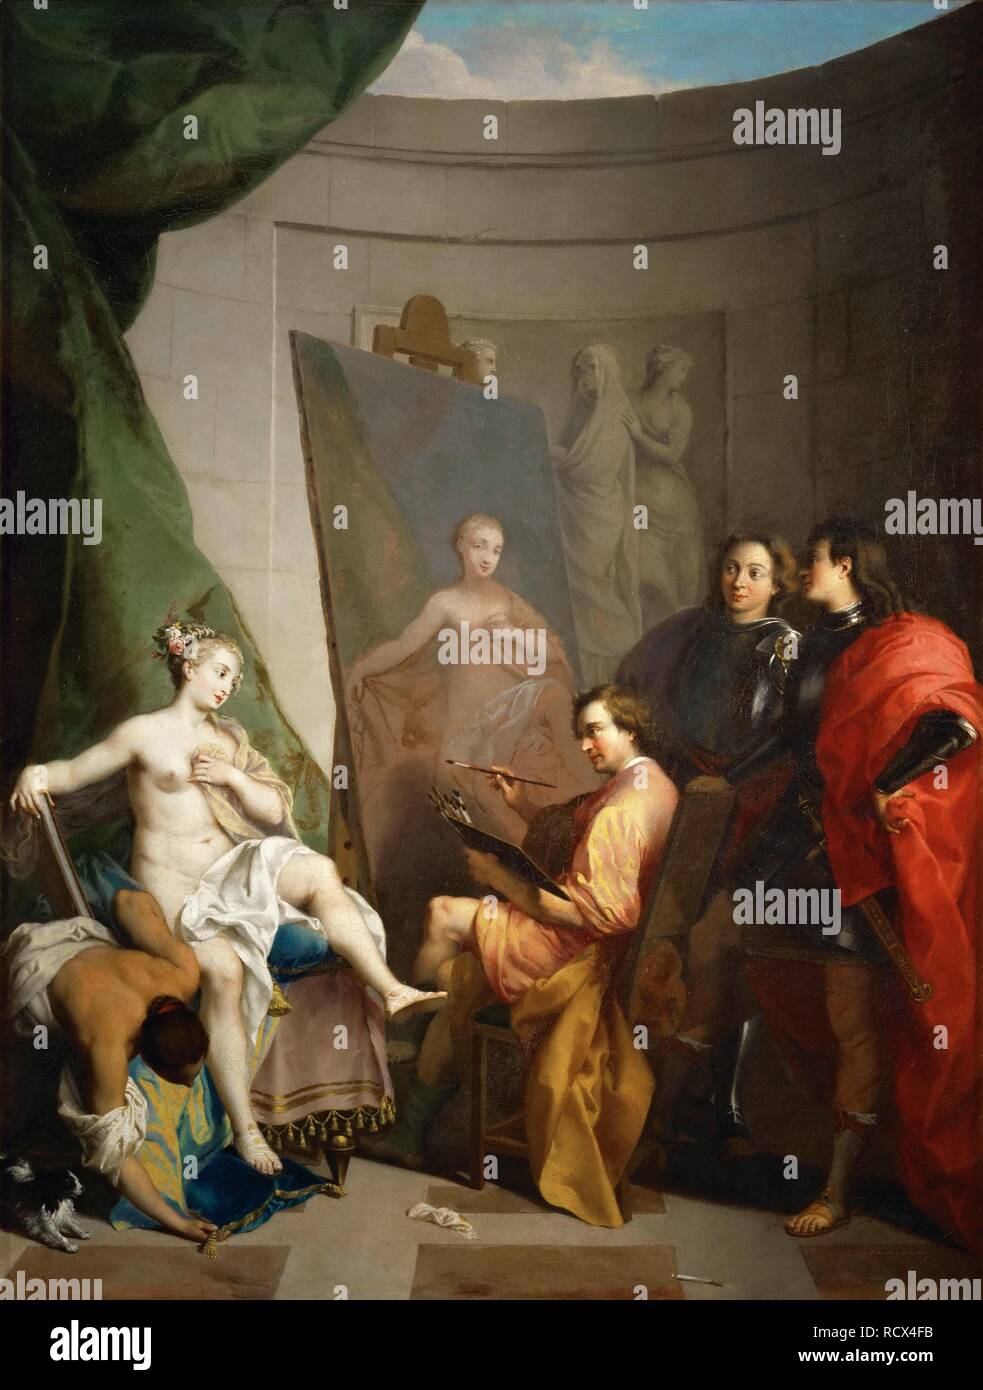 Apelles images hi-res - and photography - 2 Alamy stock Page